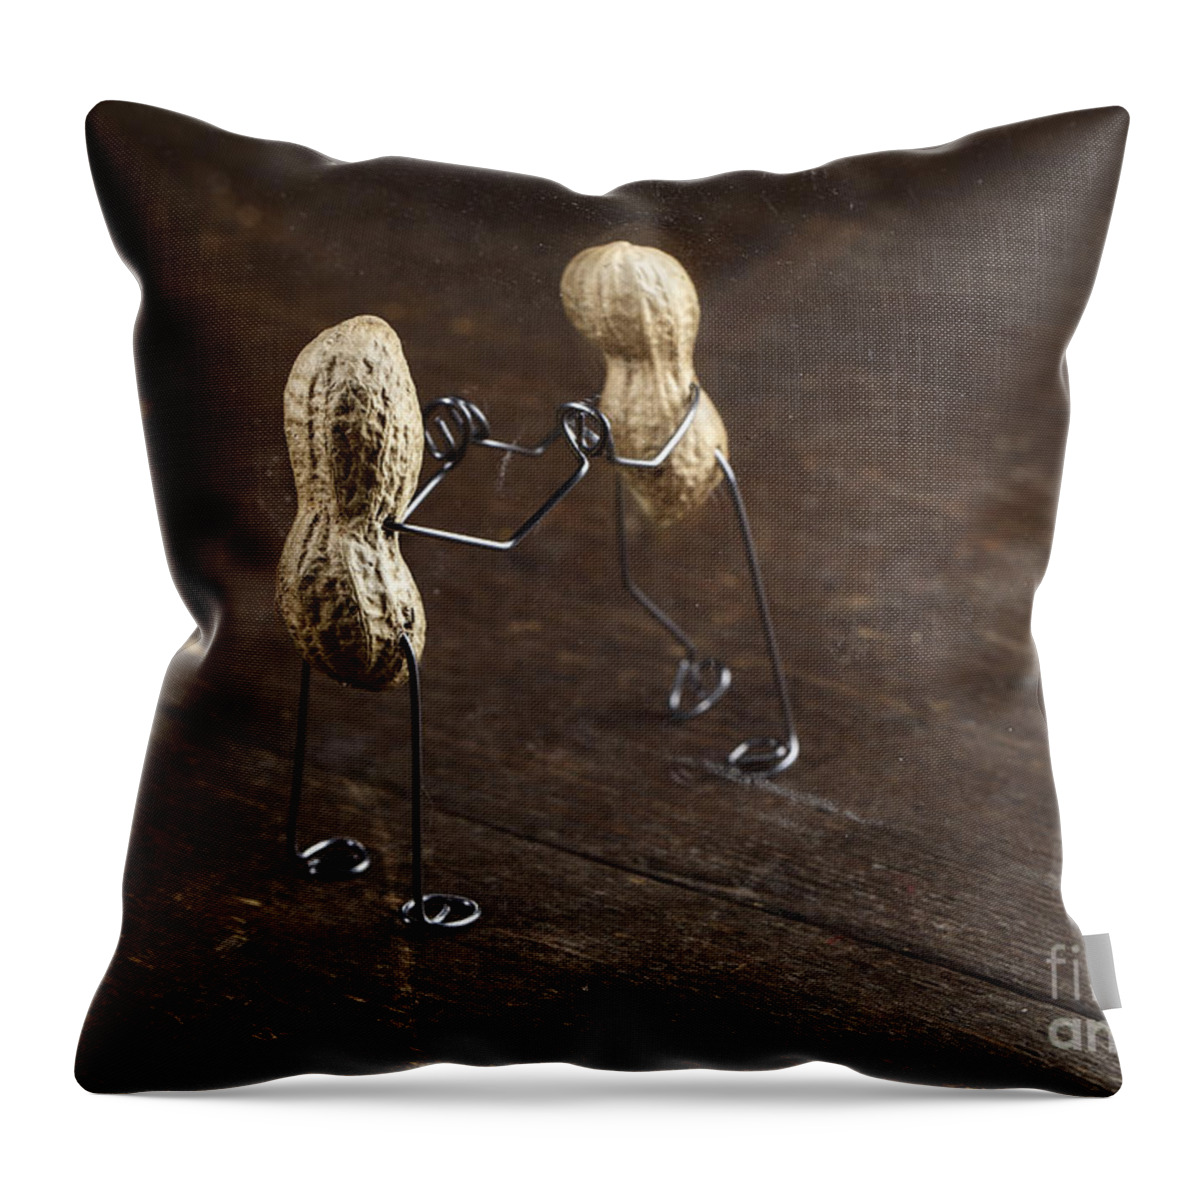 Simple Throw Pillow featuring the photograph Simple Things - Apart by Nailia Schwarz